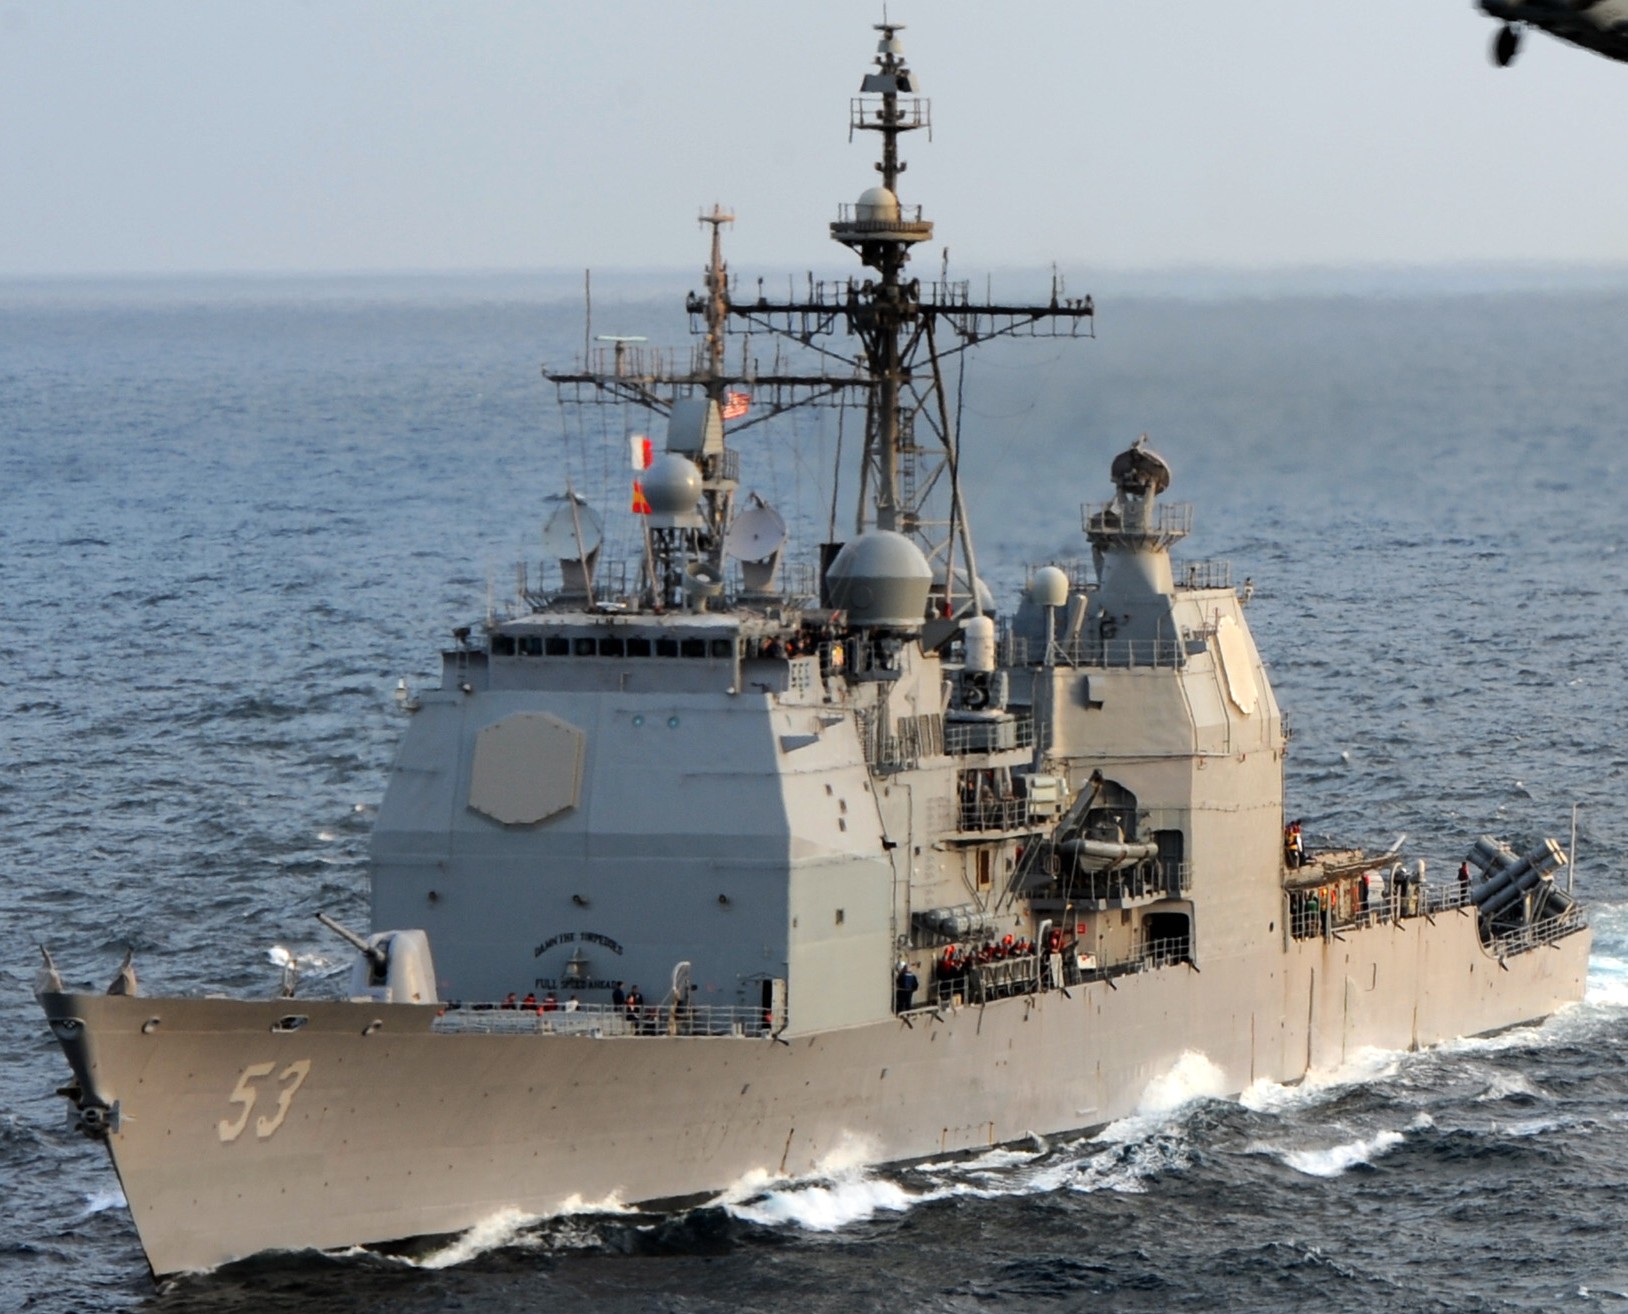 cg-53 uss mobile bay ticonderoga class guided missile cruiser aegis us navy 67